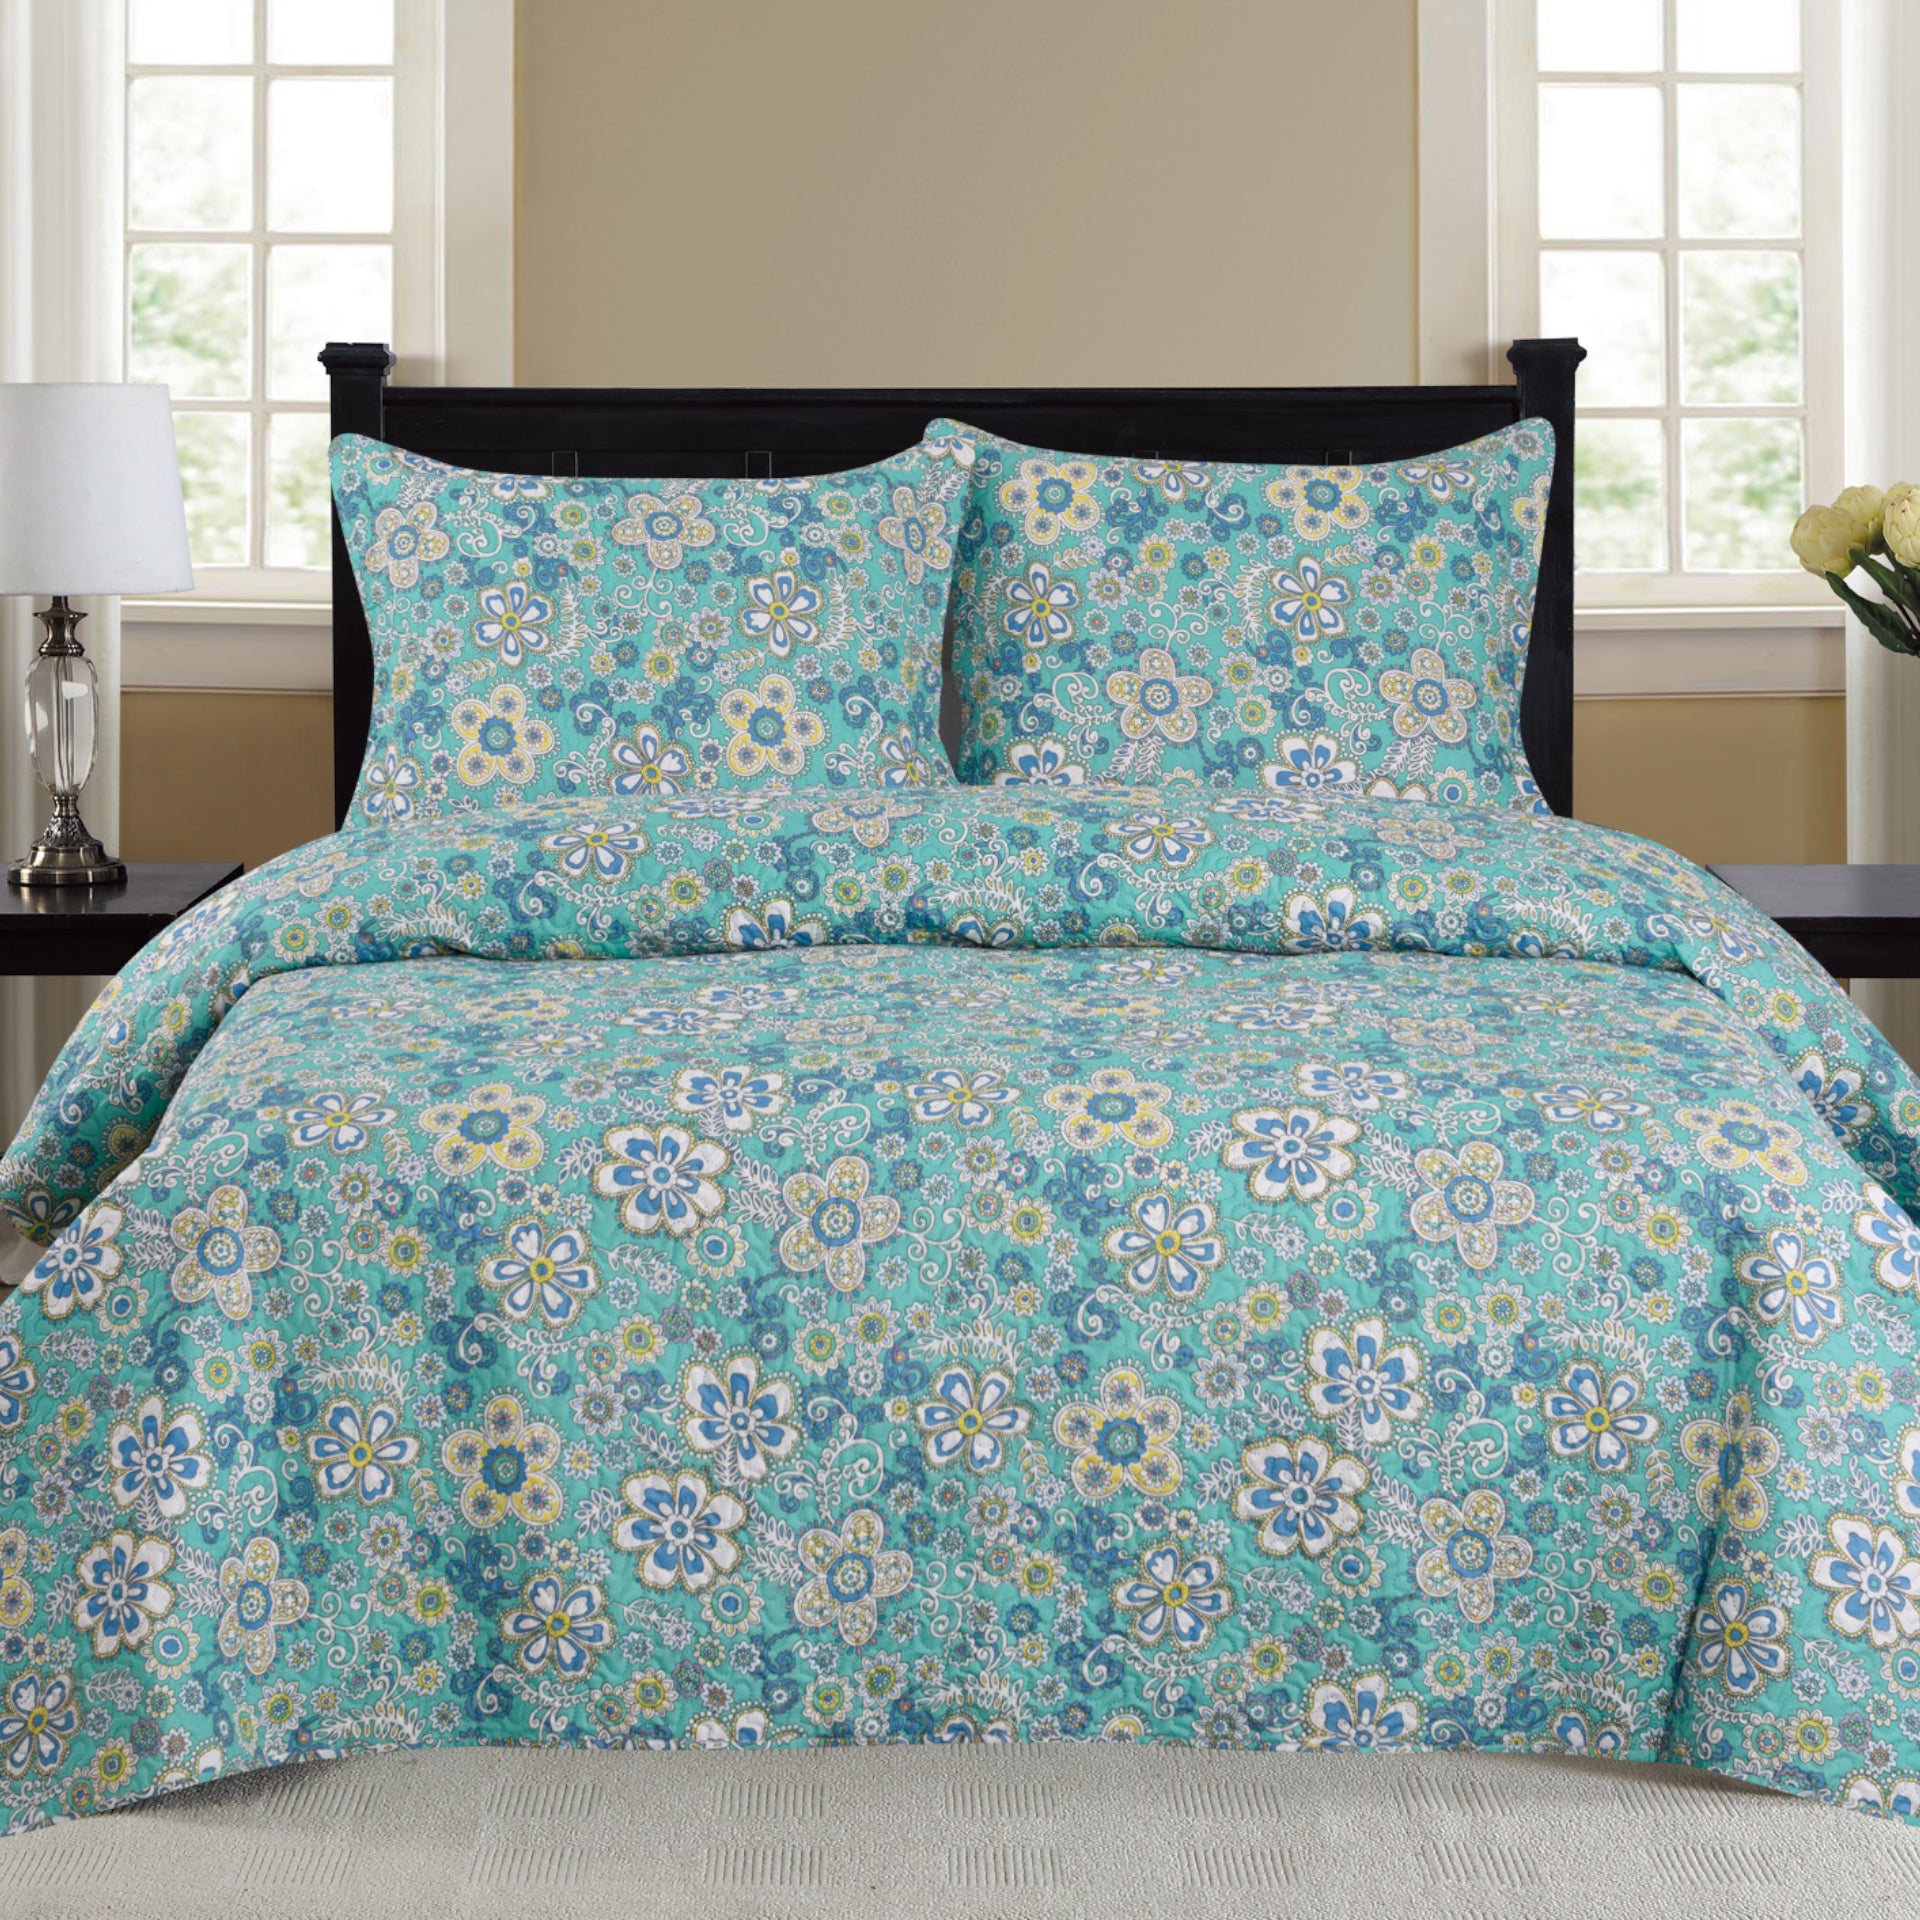 Cynthia - 3 Piece Quilt Set - Turquoise - Glory Home Design